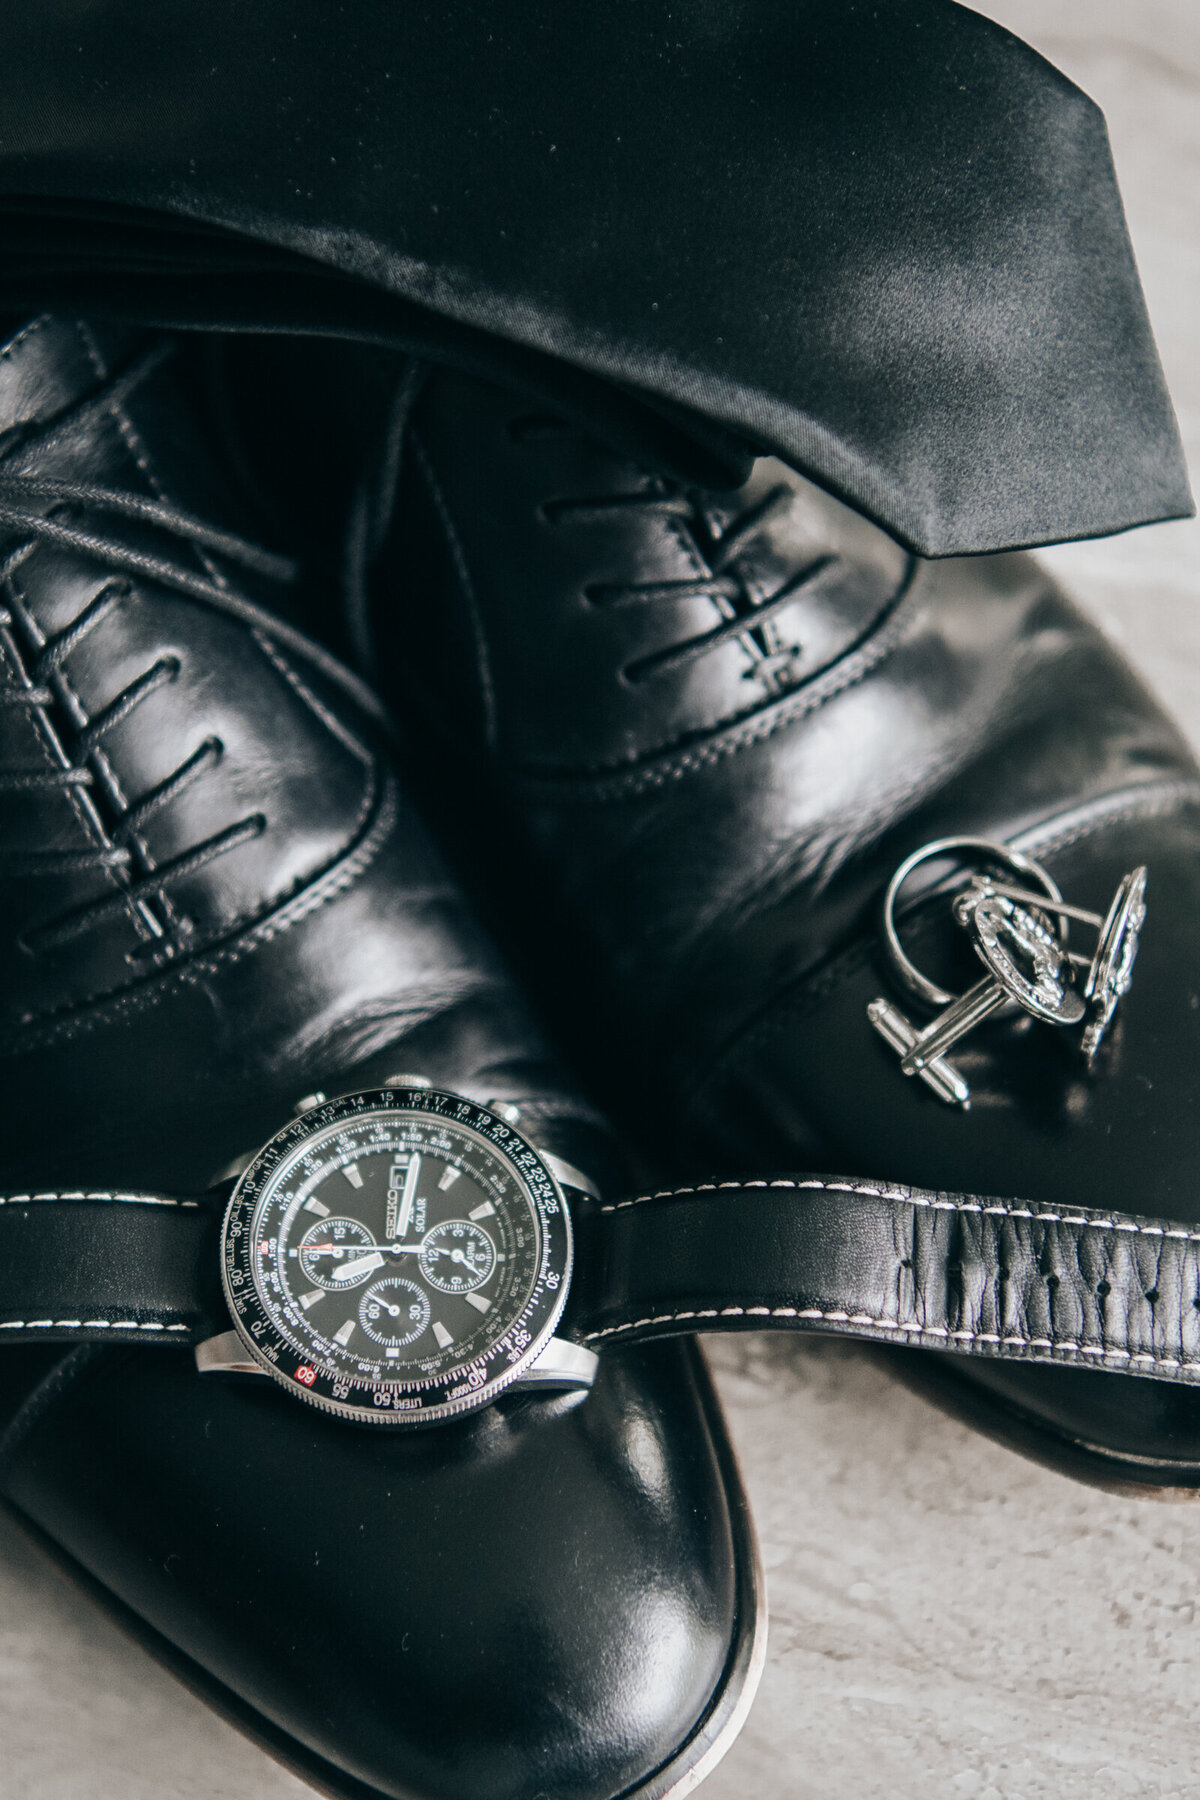 Groom details, shoes, cufflinks, wedding band and watch